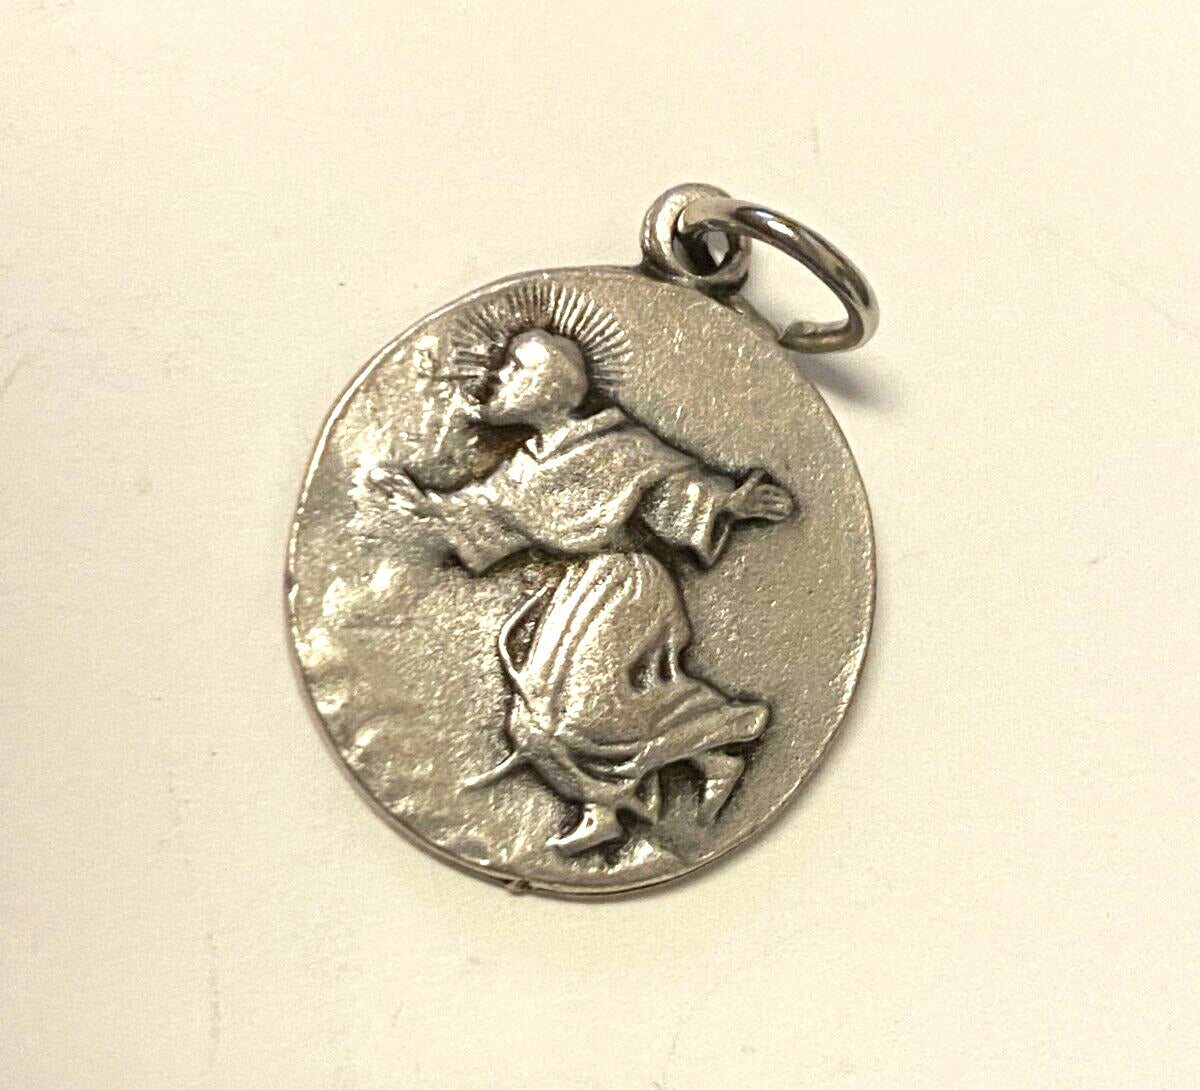 Saint Joseph of Cupertino Medal, New from Italy